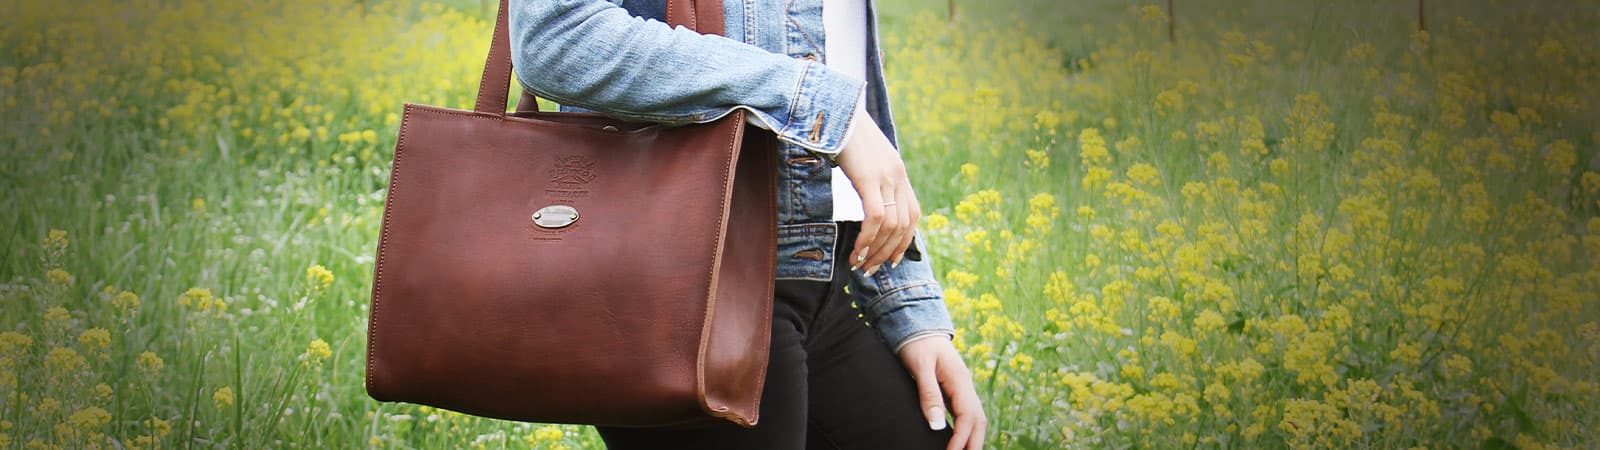 Leather Handbags Category Header - Vintage Brown Wayfarer Tote over woman's shoulder standing in field of yellow flowers